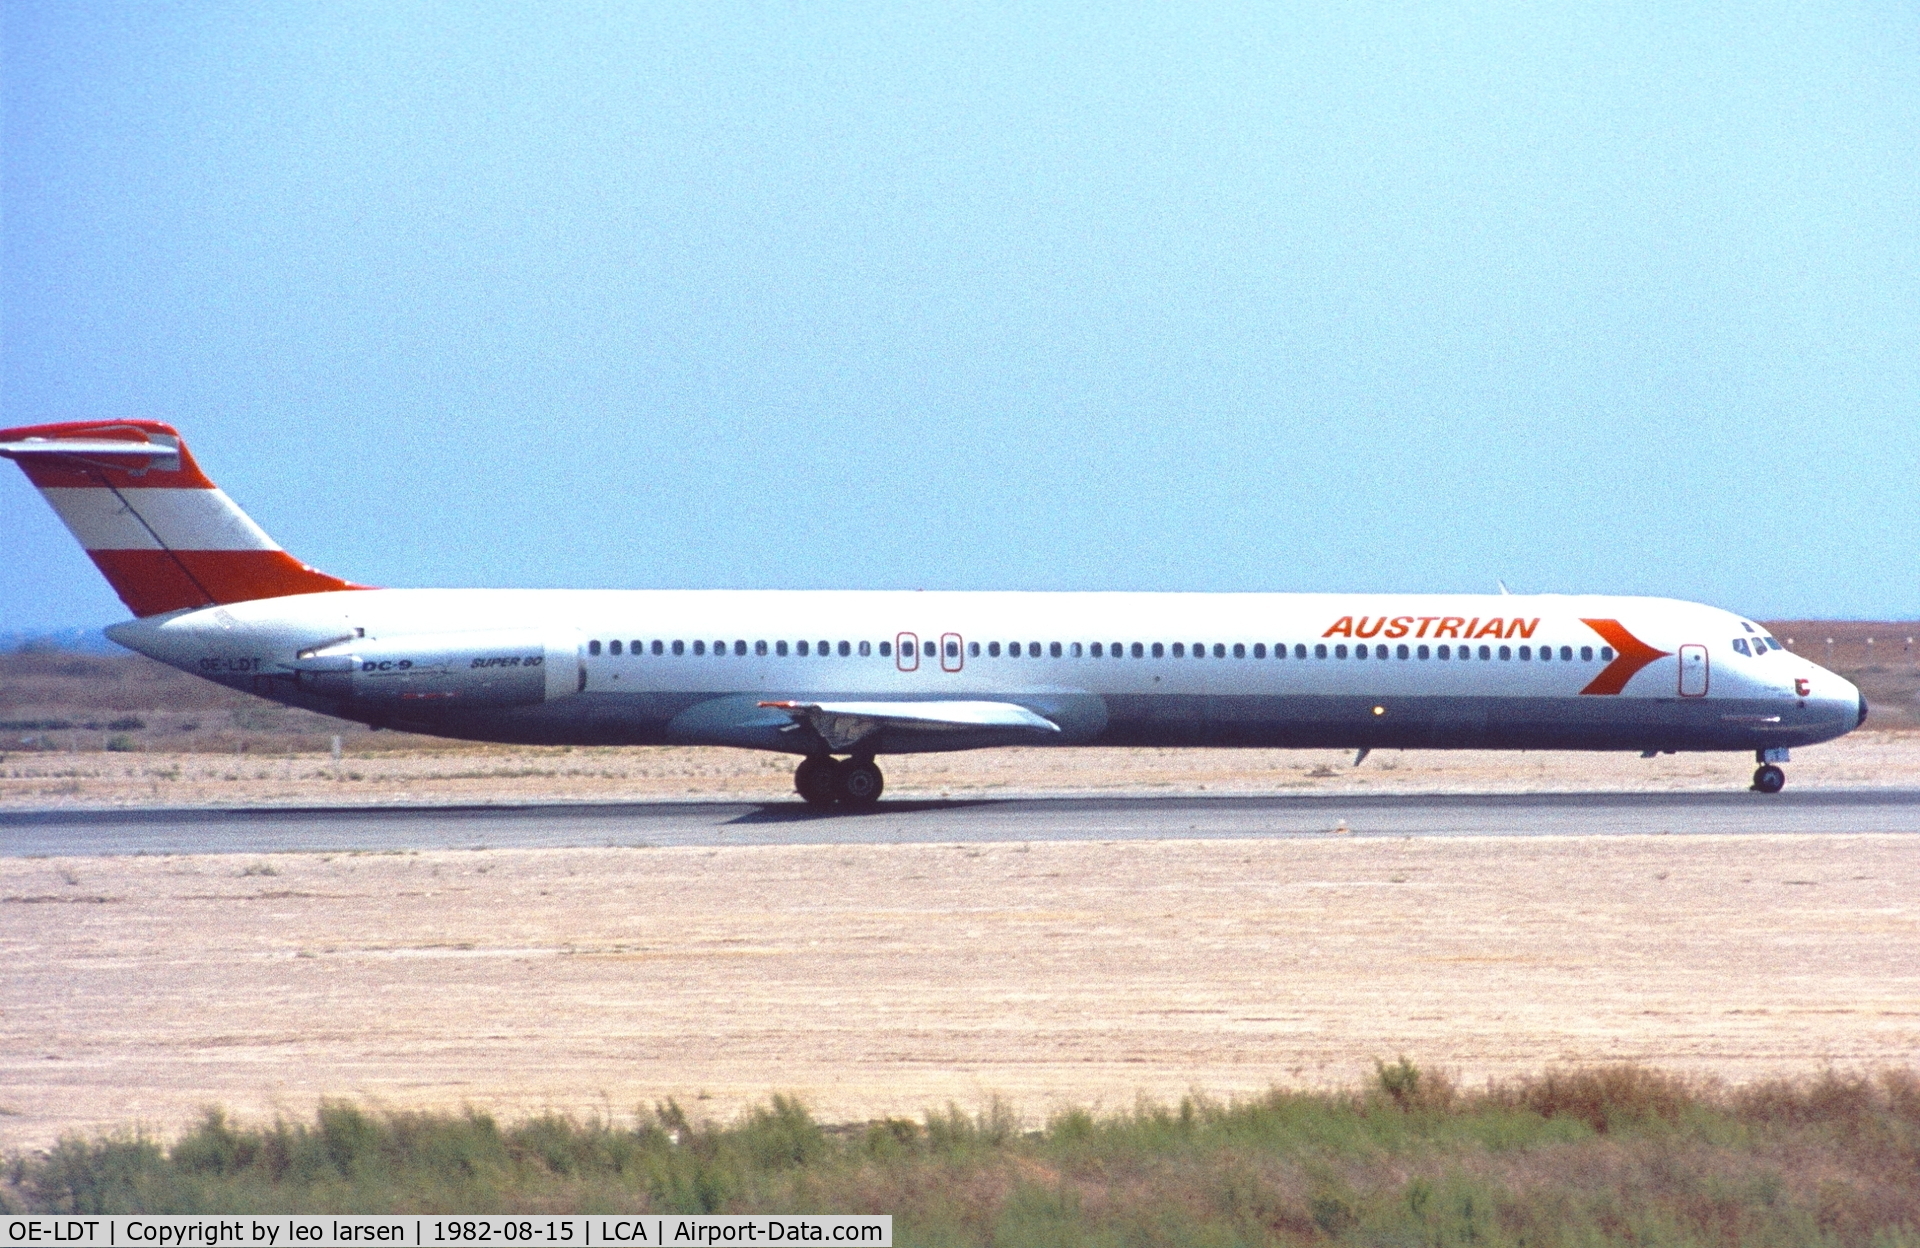 OE-LDT, 1981 McDonnell Douglas MD-81 (DC-9-81) C/N 48018, Larnaca 15.8.1982. with DC-9 Super 80 on engine cowling.